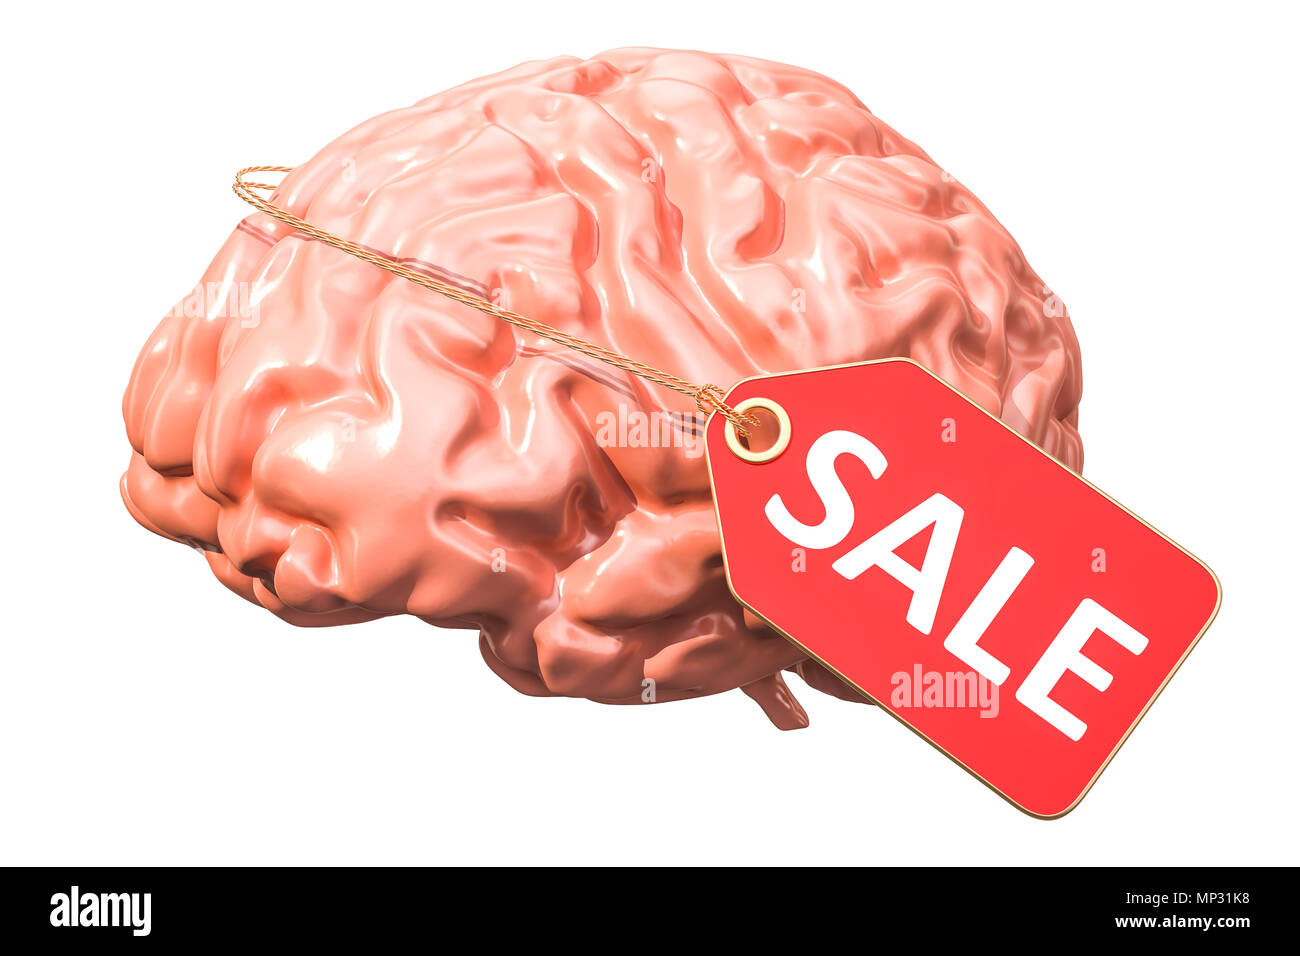 Brain for sale with price tag, 3D rendering isolated on white background Stock Photo